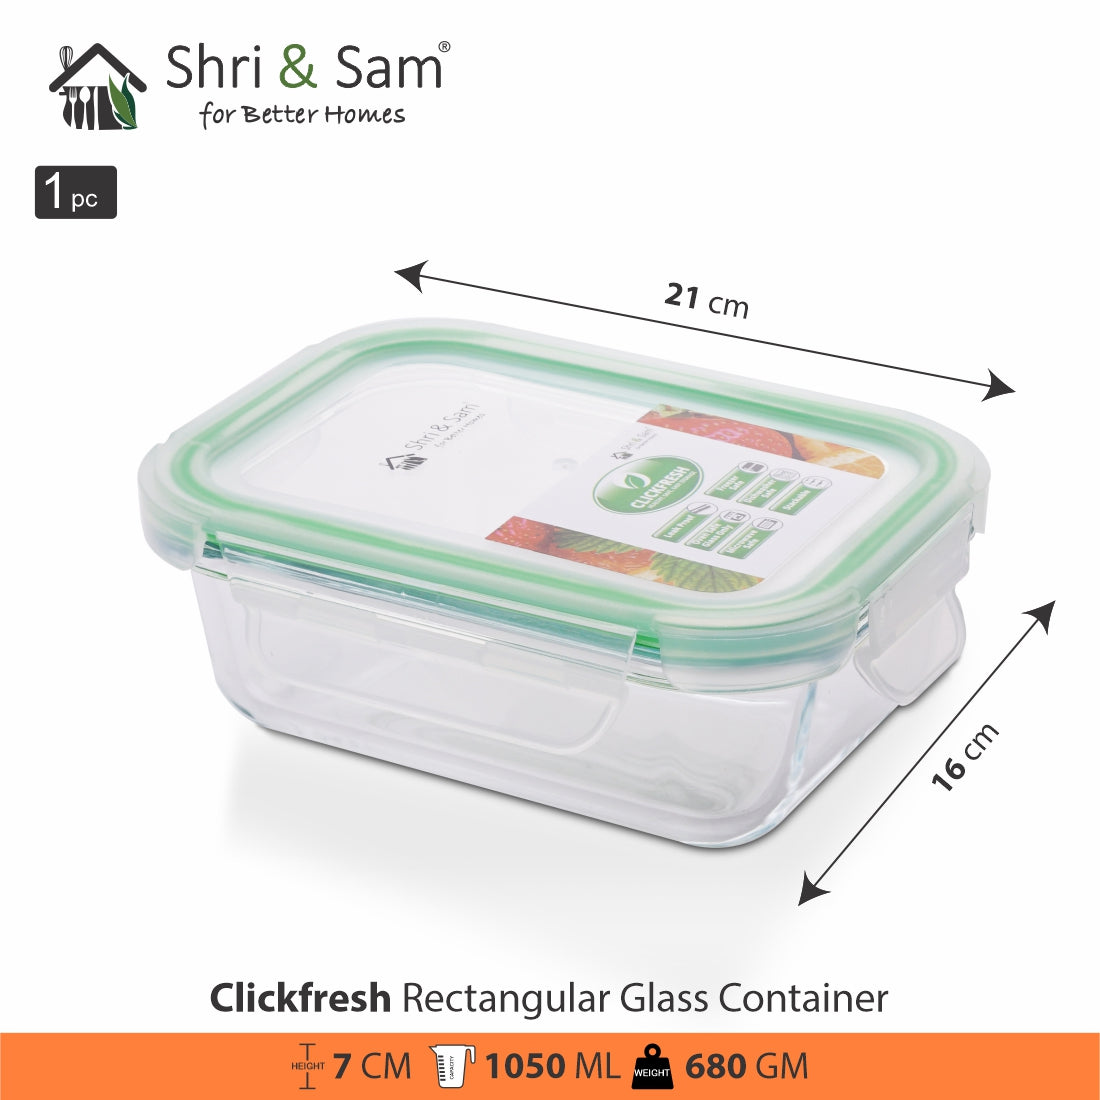 Glass 1050ml Food Storage & Bakeware Container with Airtight Lid Rectangular Clickfresh